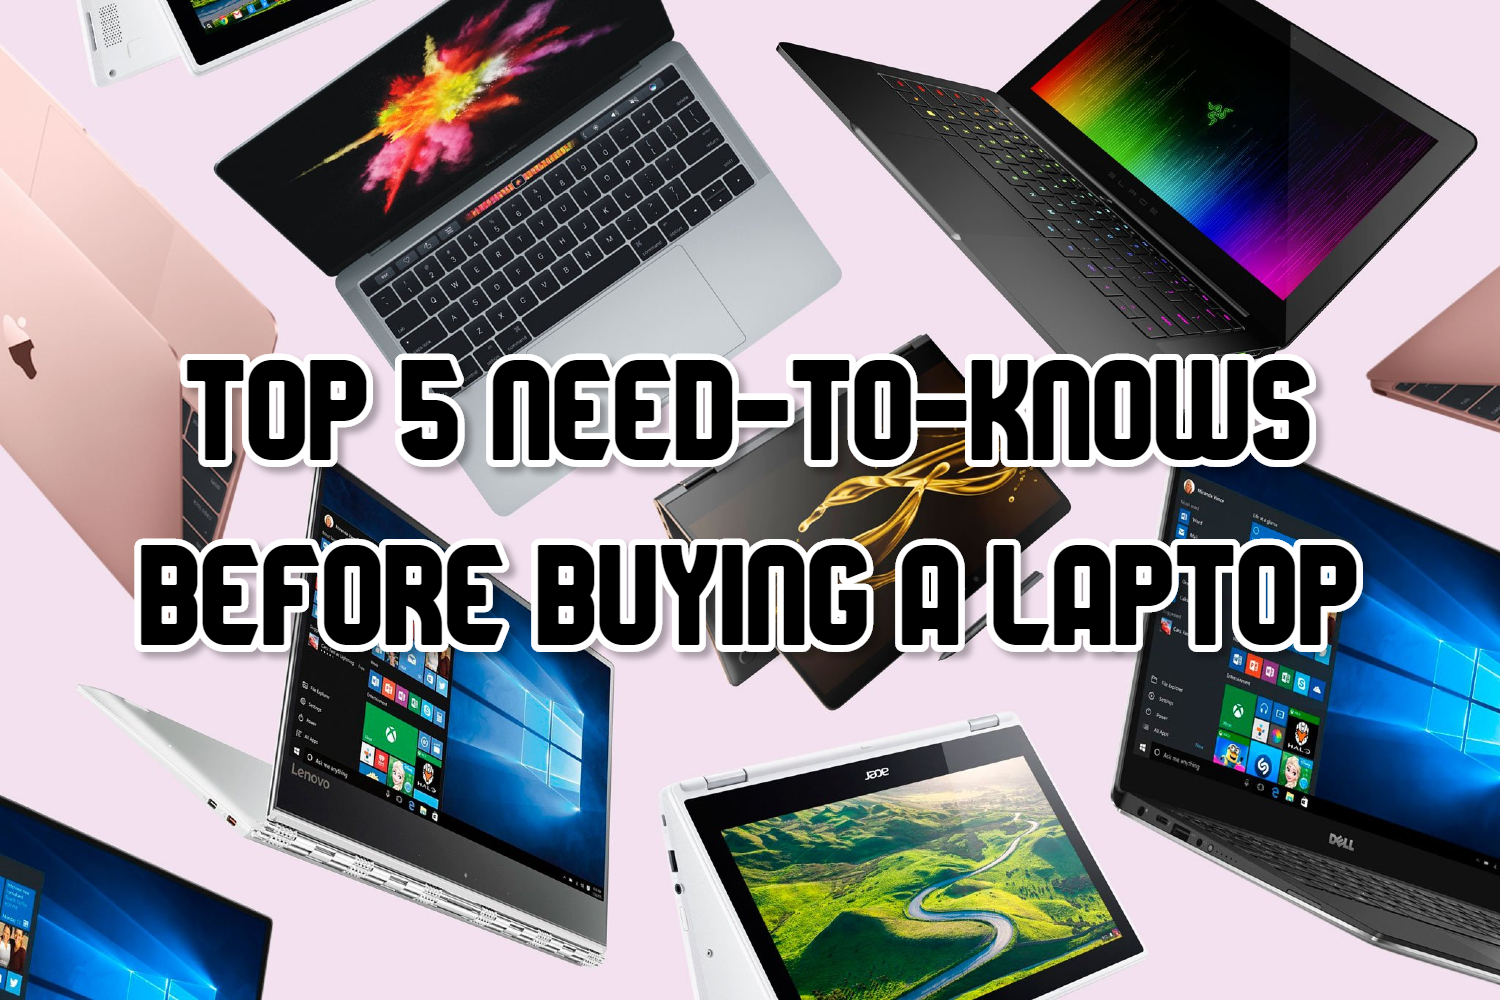 5 things to consider when buying a laptop for your child